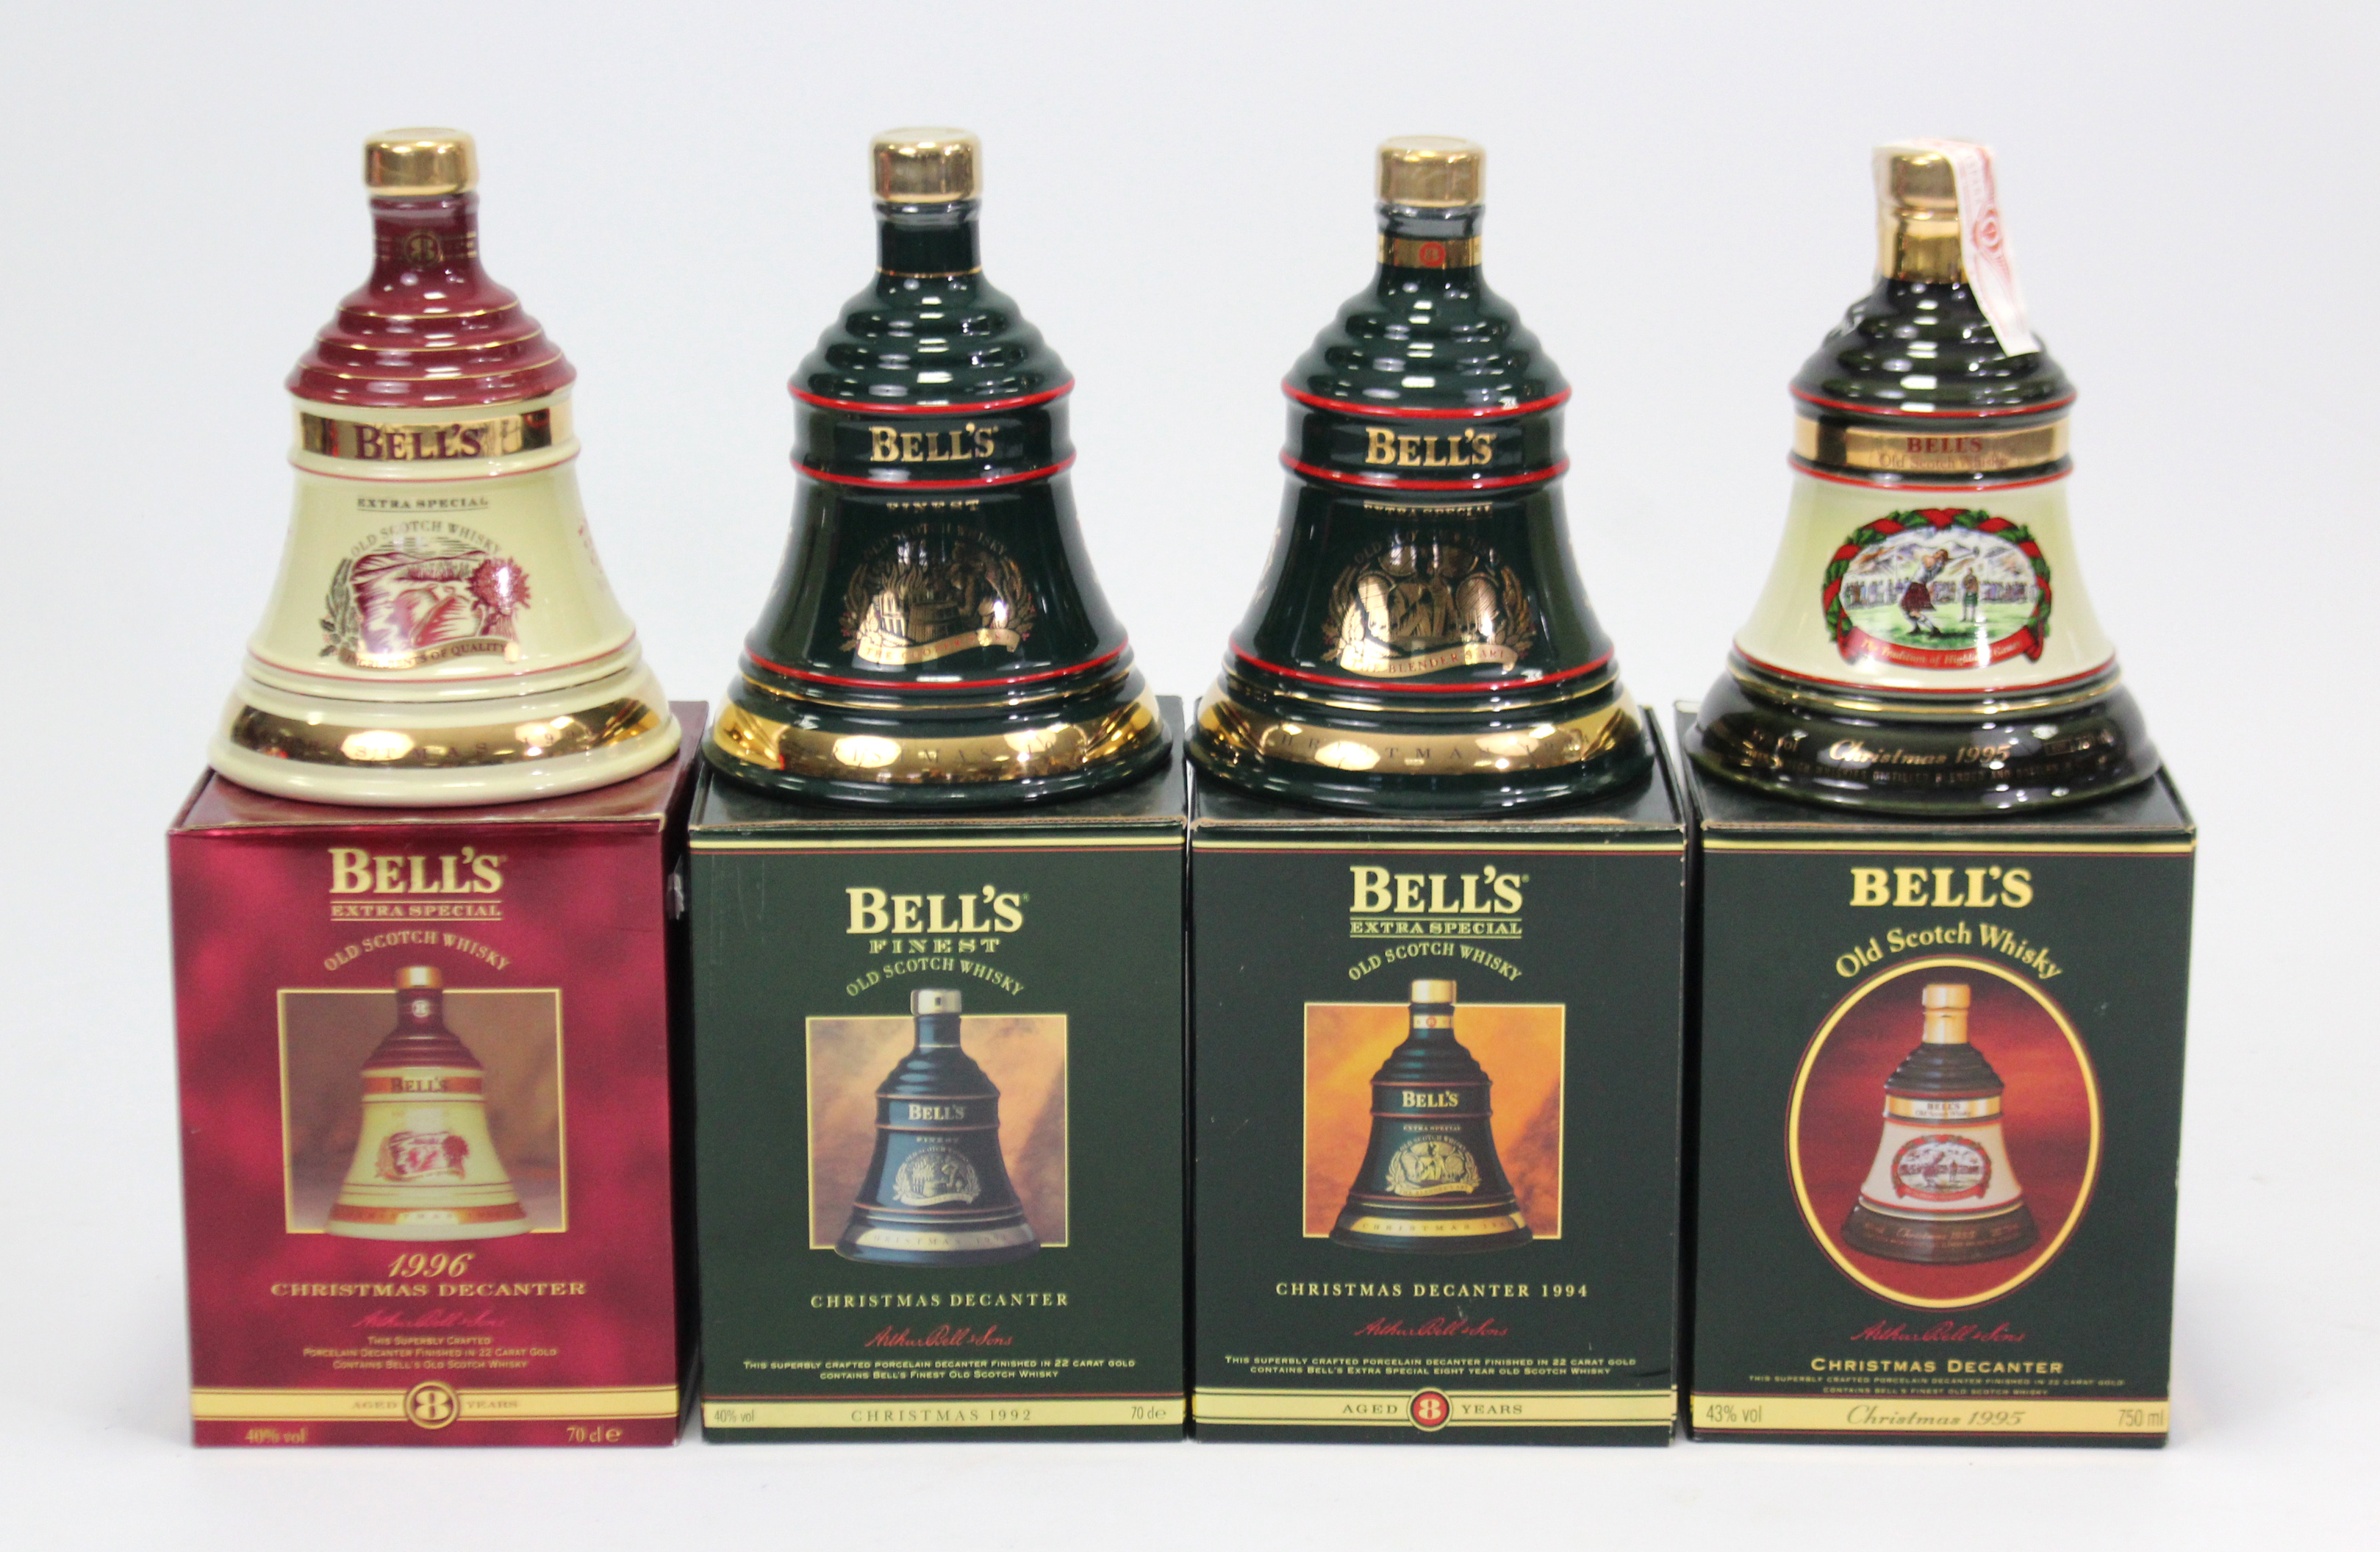 Four Bells old Scotch whisky bell-shaped decanters (Christmas 1992,1994,1995, & 1996), all with